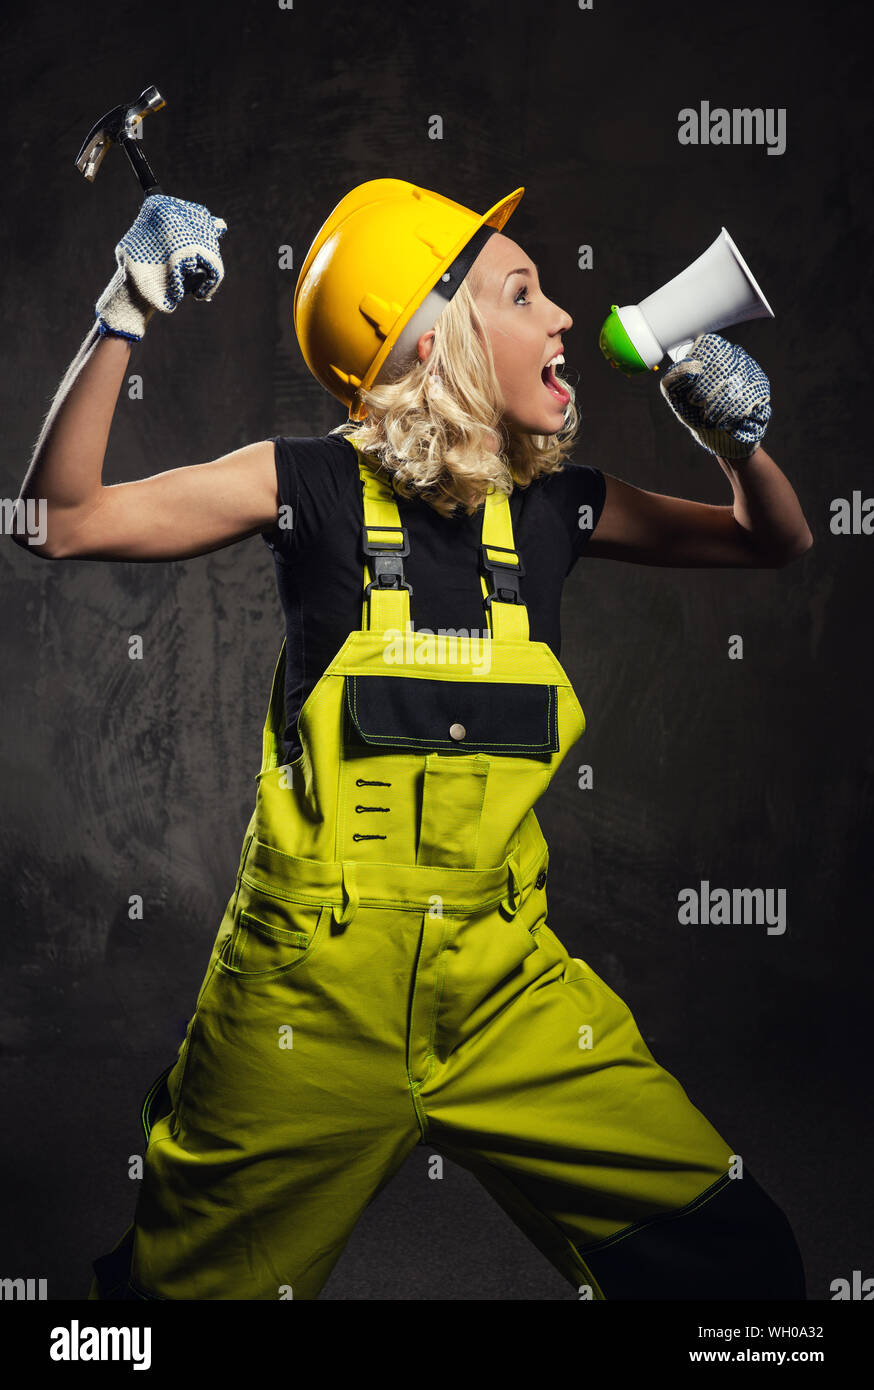 Female Construction Worker Shouting On Megaphone While Standing Against Wall Stock Photo